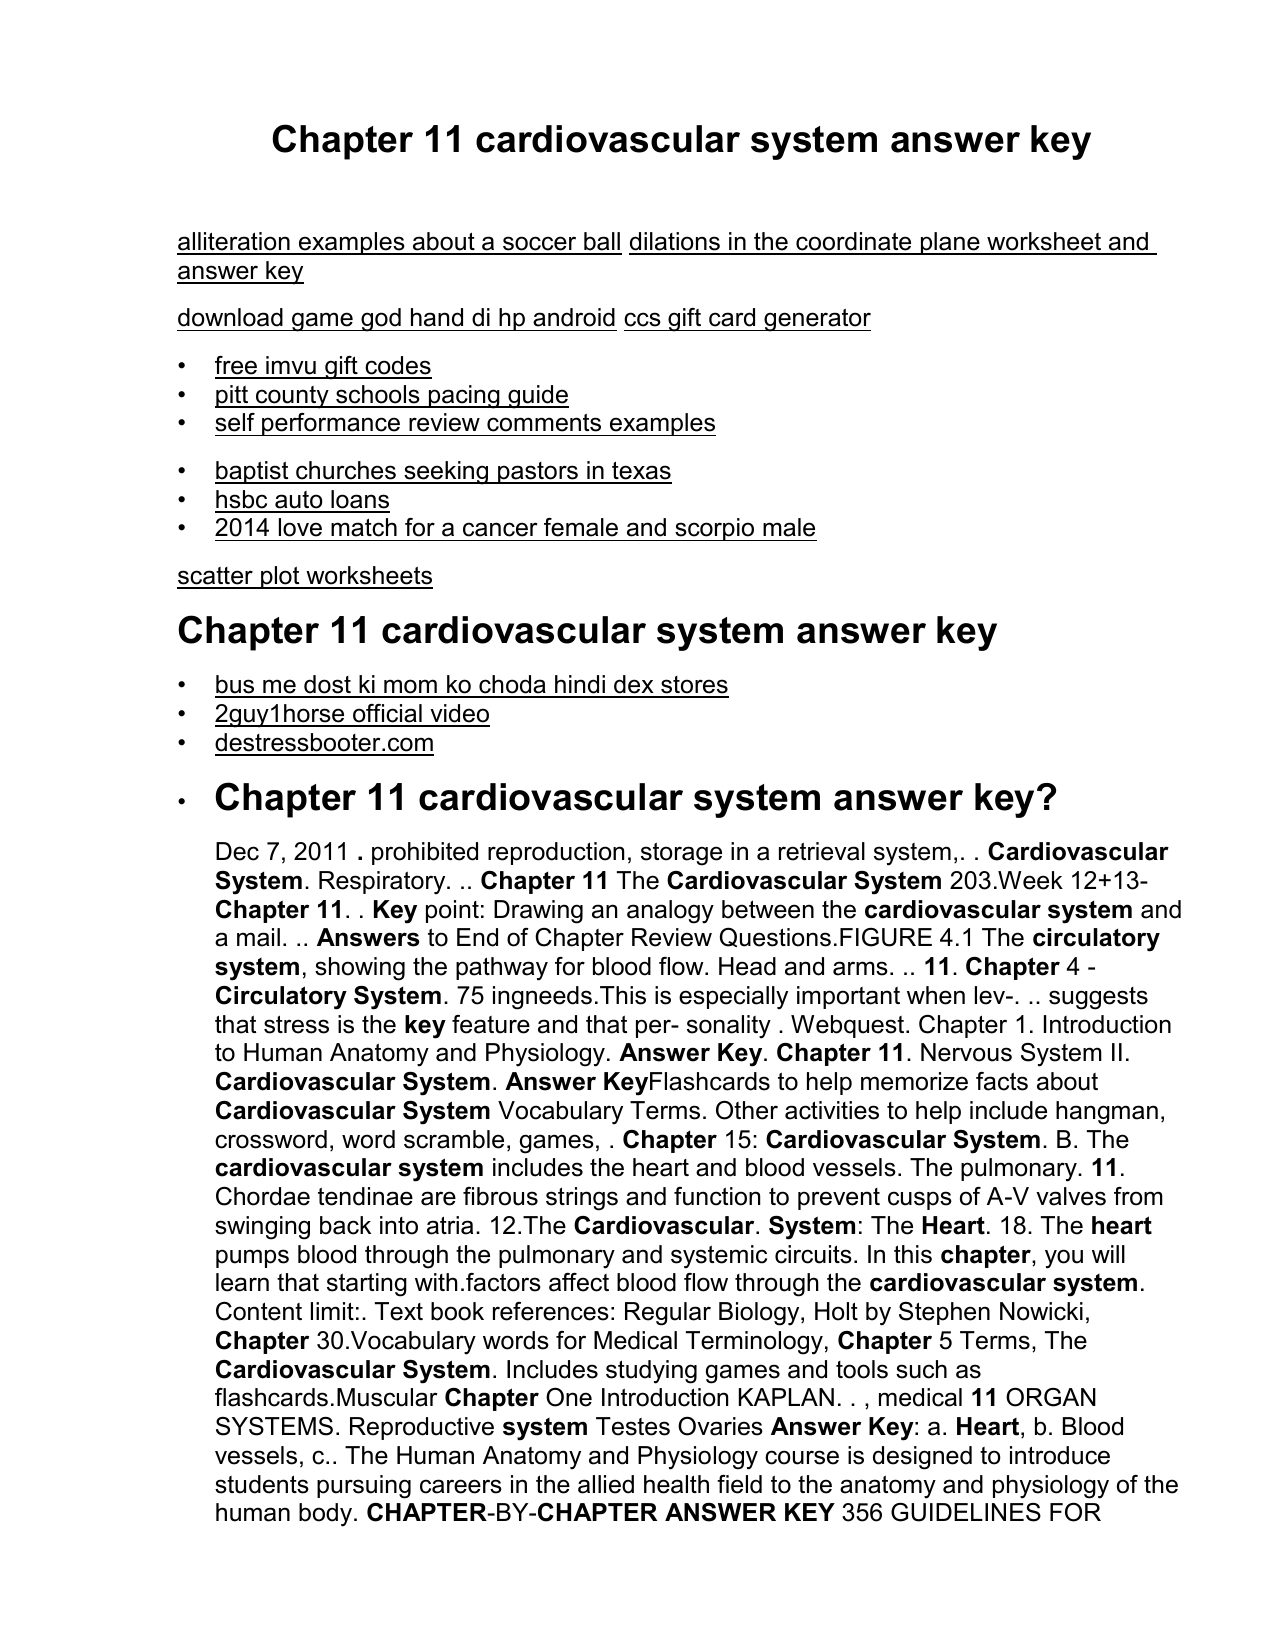 Chapter 11 Cardiovascular System Answer Key For Chapter 11 The Cardiovascular System Worksheet Answer Key